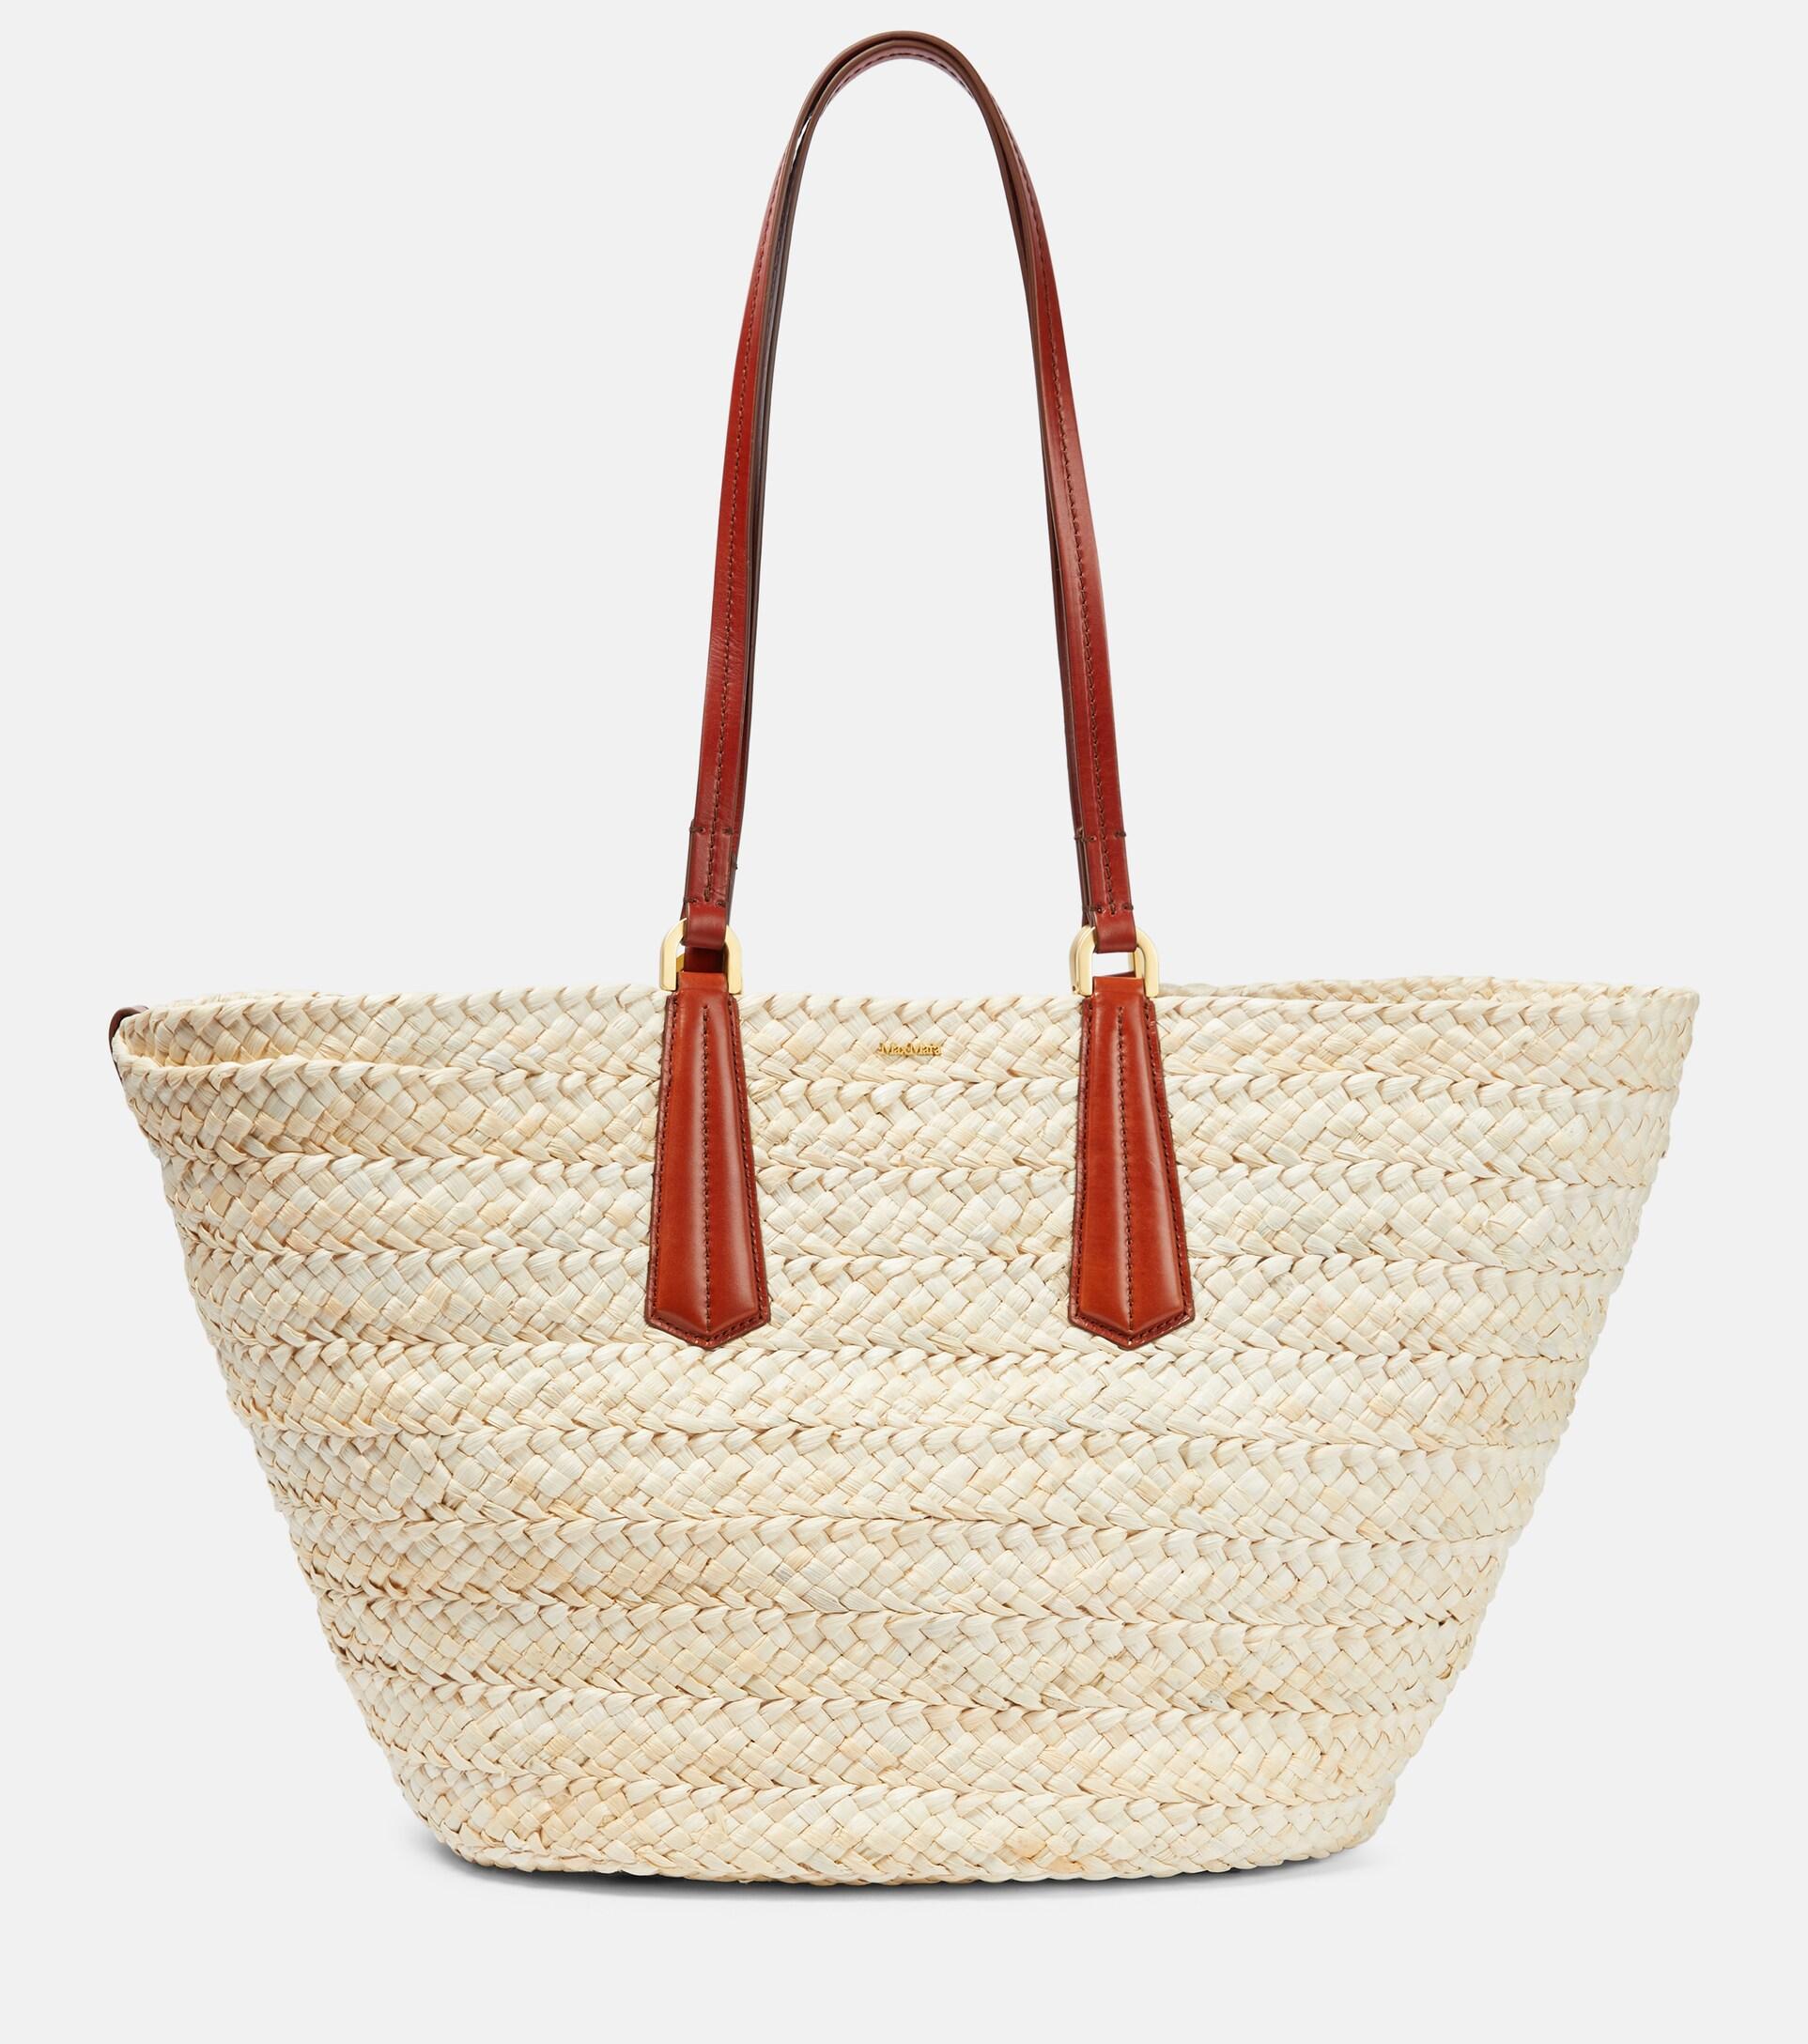 Max Mara Panier Extra Large Straw Tote Bag in Natural | Lyst